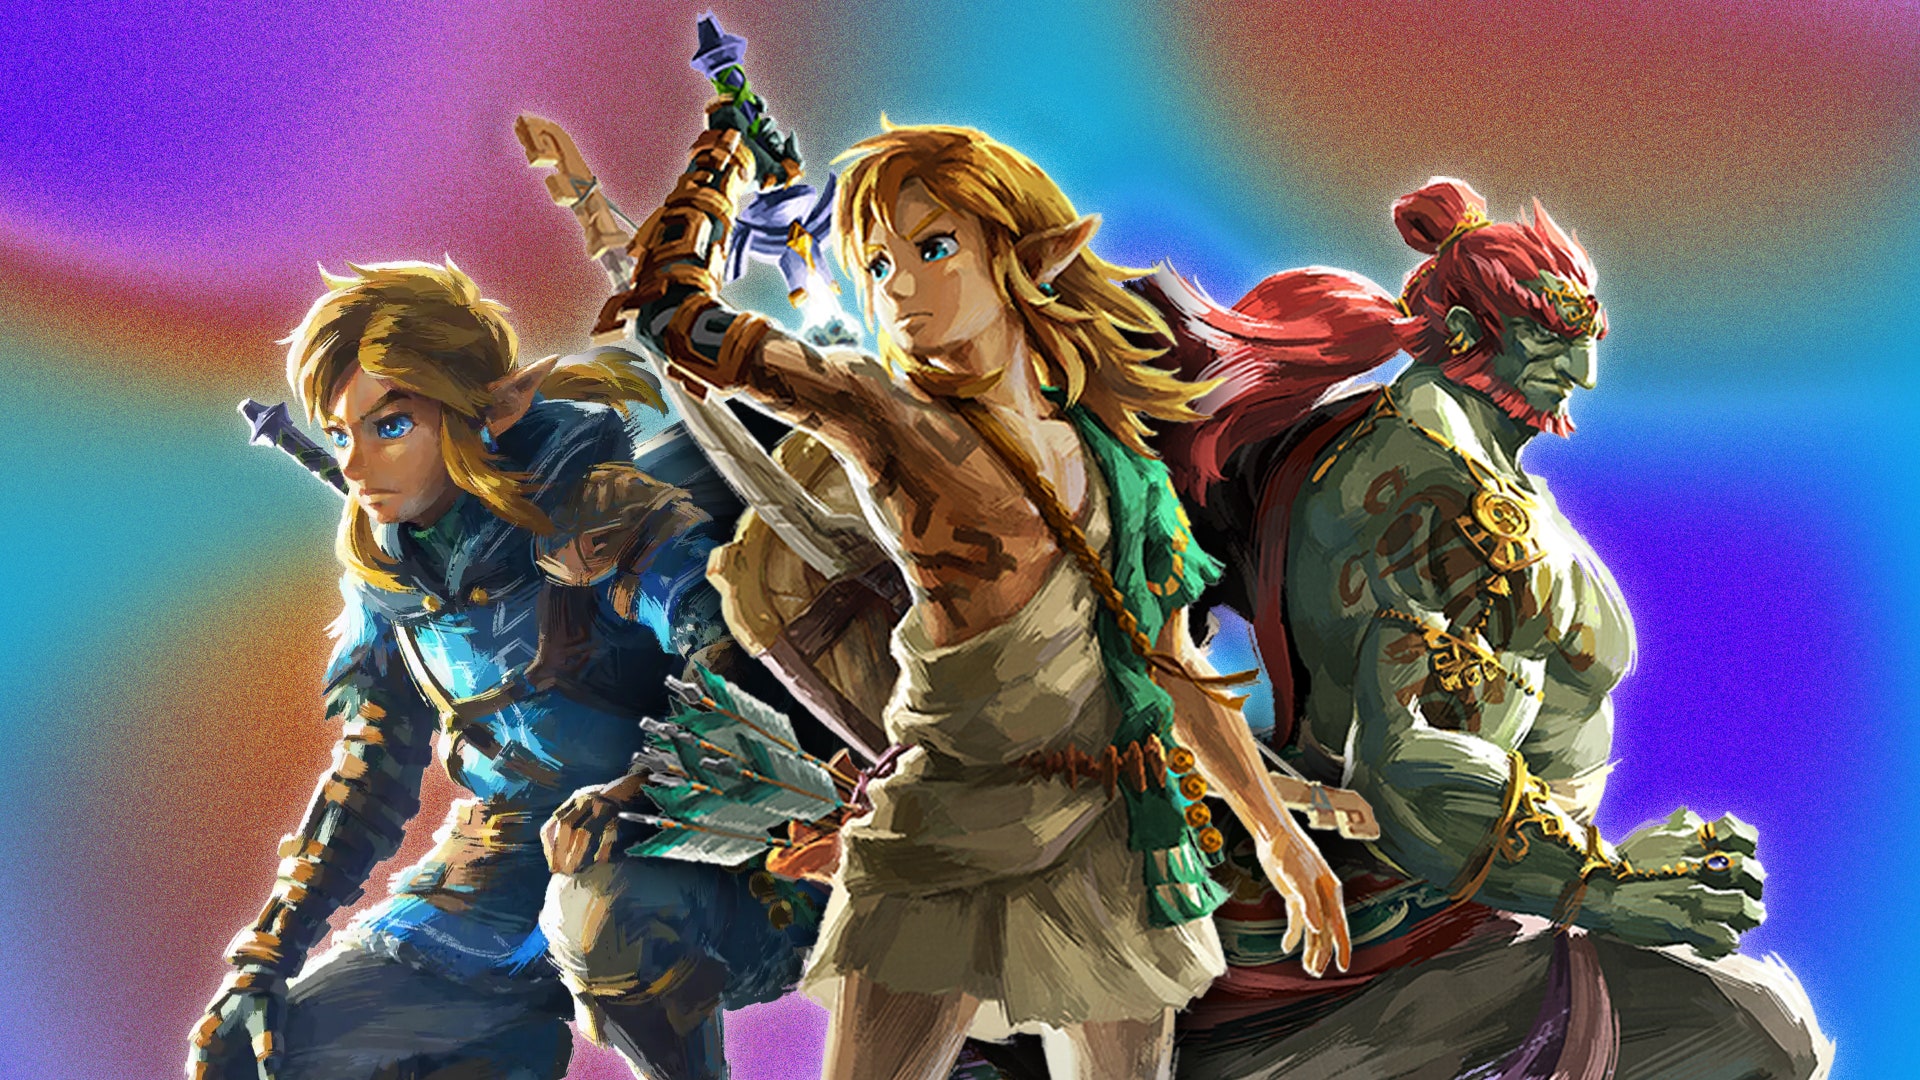 Zelda: Tears of the Kingdom updated to Version 1.2.1 (patch notes)